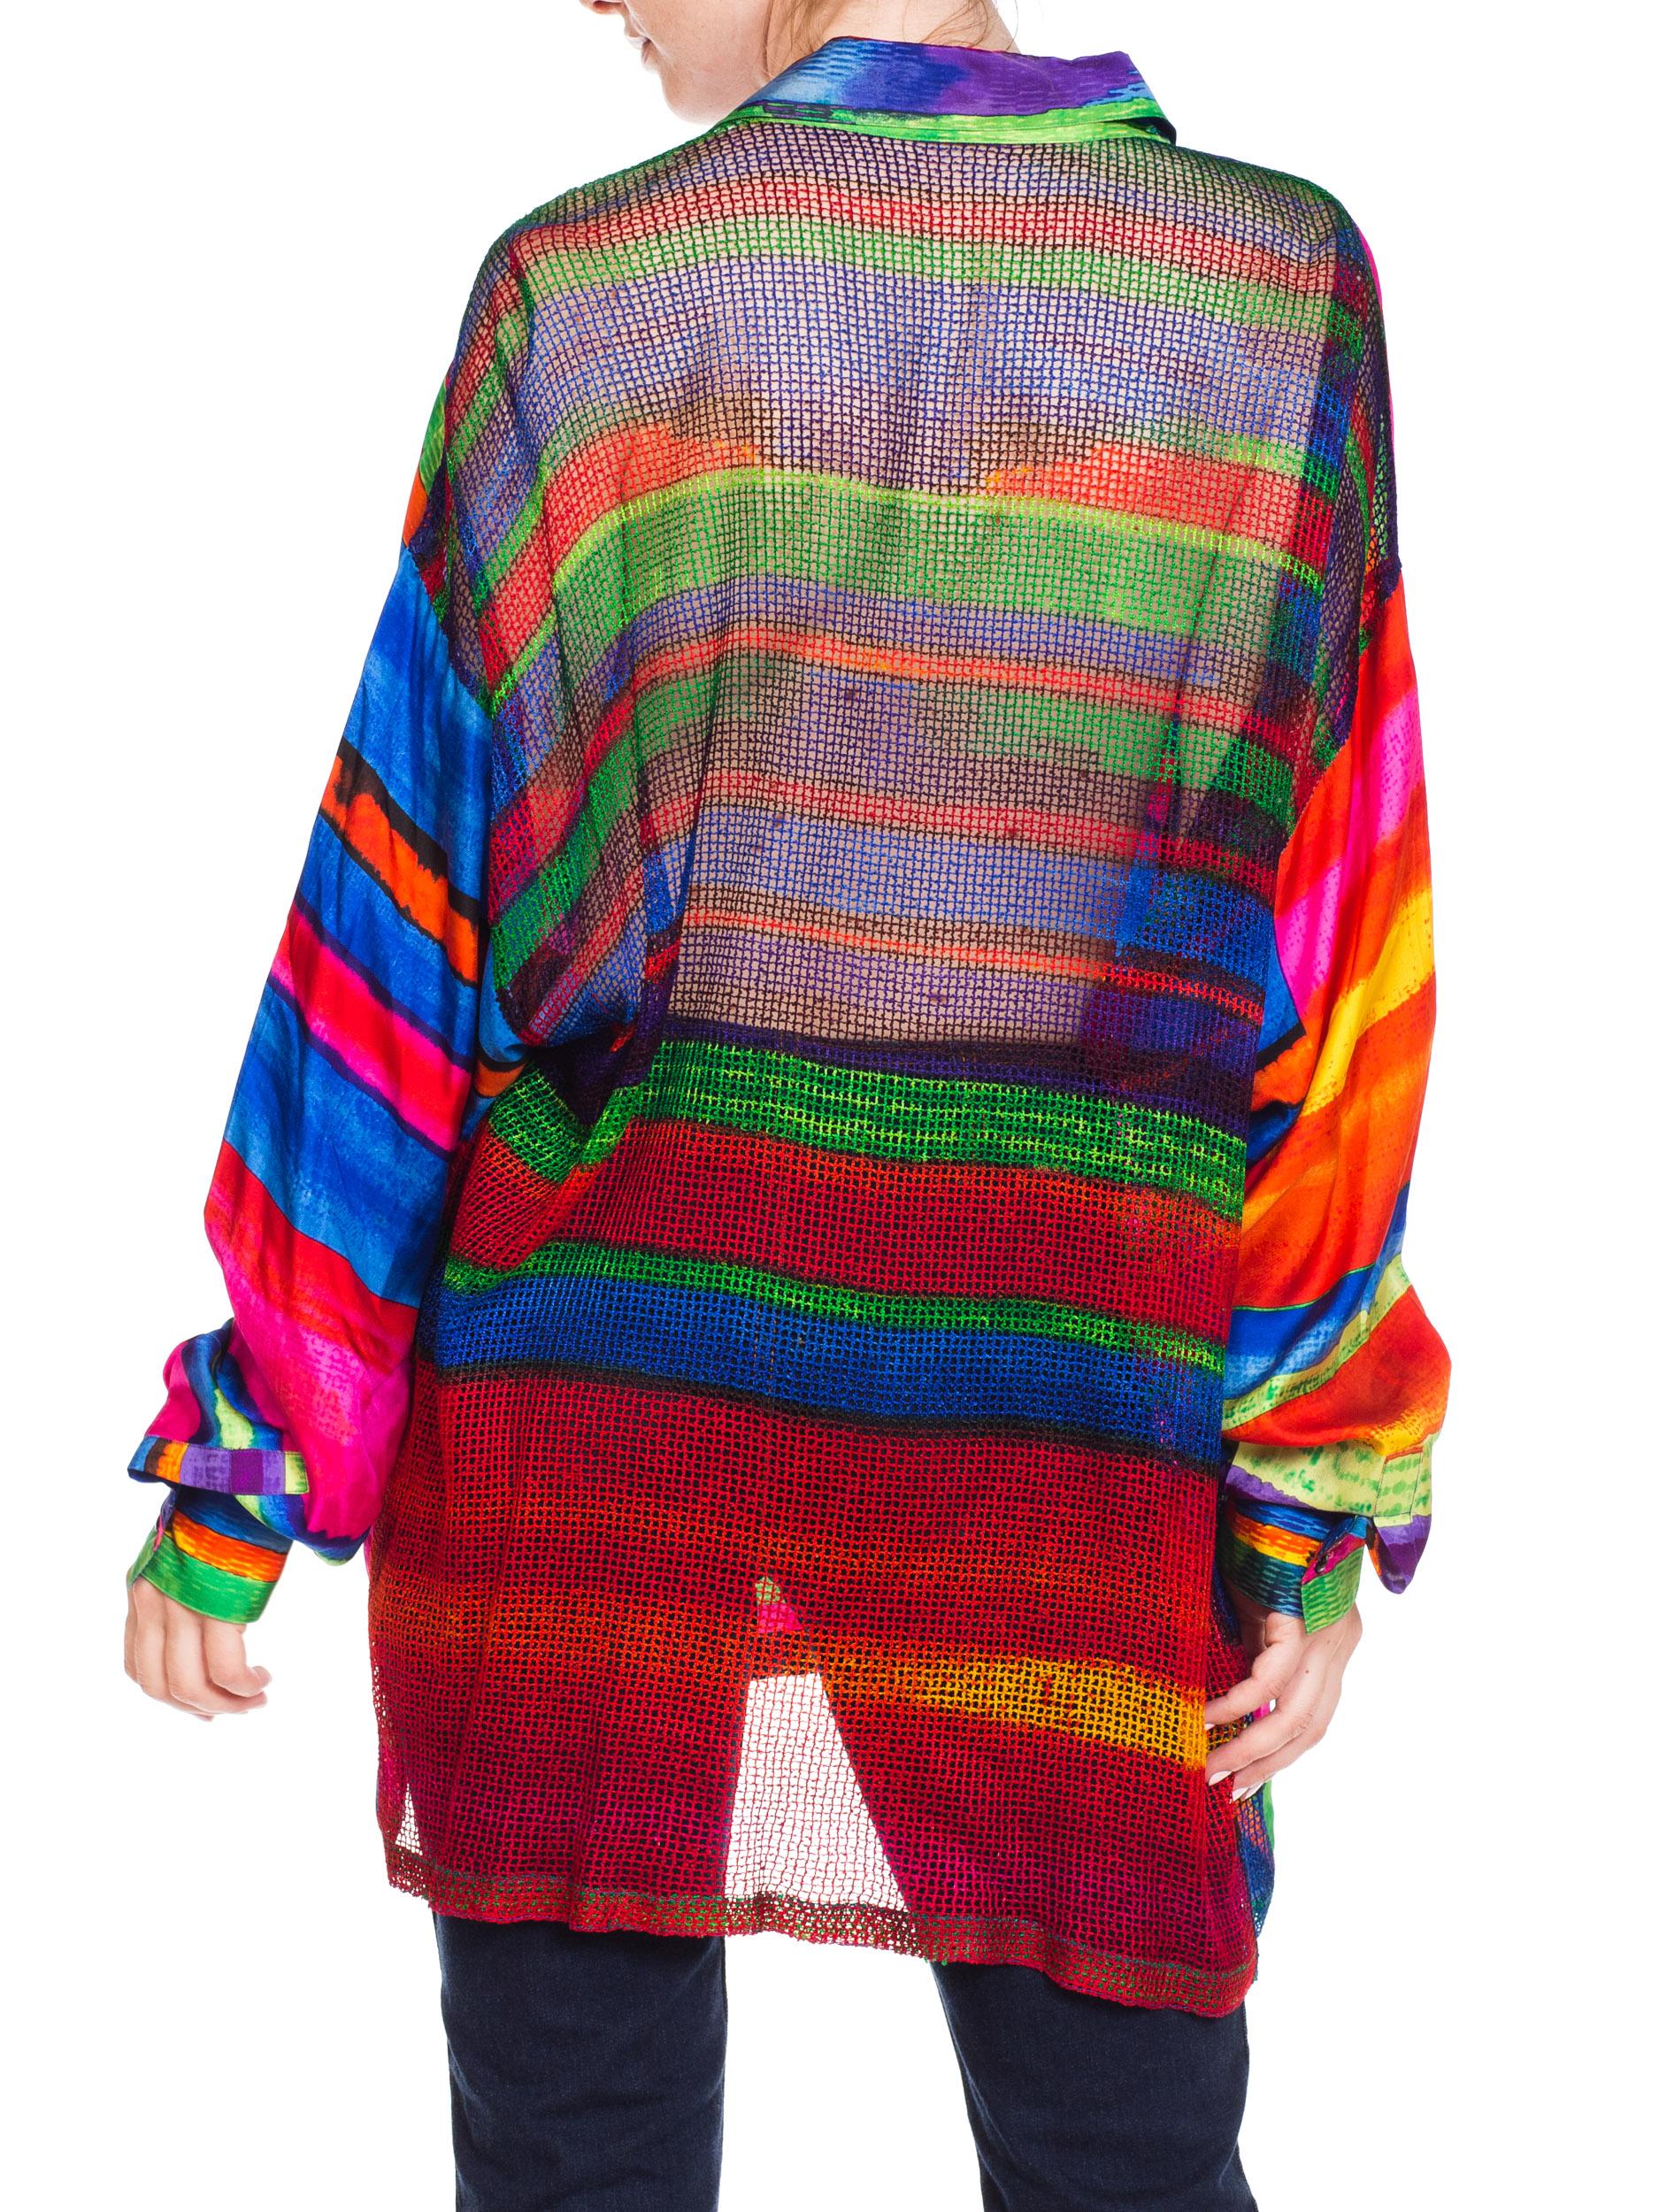 Red 1990S GIANNI VERSACE Silk Men's Colorful Shirt With Sheer Net Back Panel